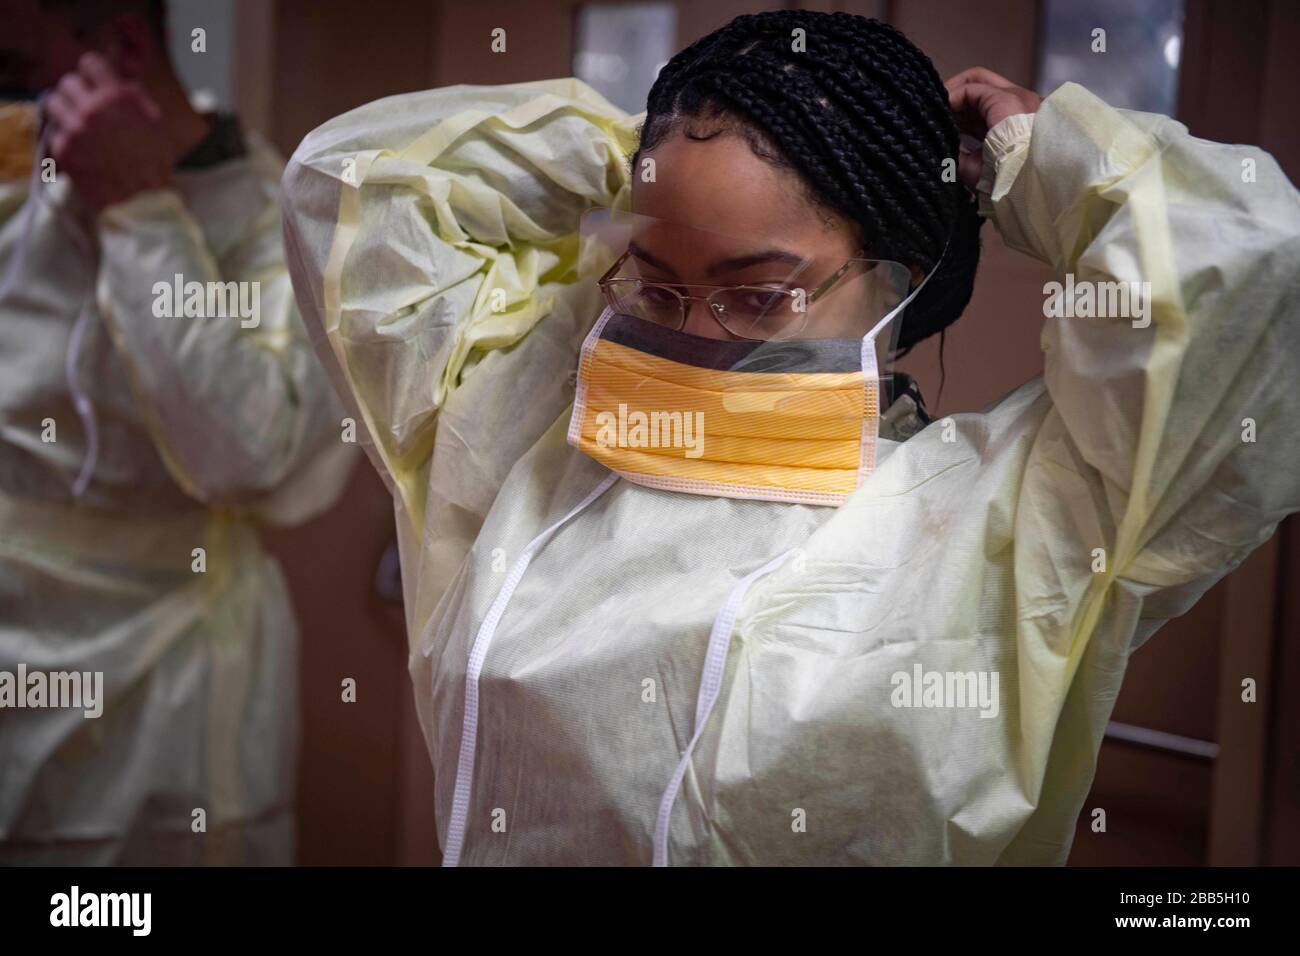 Norfolk, United States Of America. 29th Mar, 2020. Norfolk, United States of America. 29 March, 2020. U.S. Navy Hospitalman Apprentice Kaylah Jenkins dons personal protective equipment during infection control training aboard the hospital ship USNS Comfort as the ship transits the Atlantic Ocean on its way to New York City in support of the COVID-19 pandemic March 29, 2020 in Atlantic Ocean. Credit: Sara Eshleman/U.S. Navy Photo/Alamy Live News Stock Photo